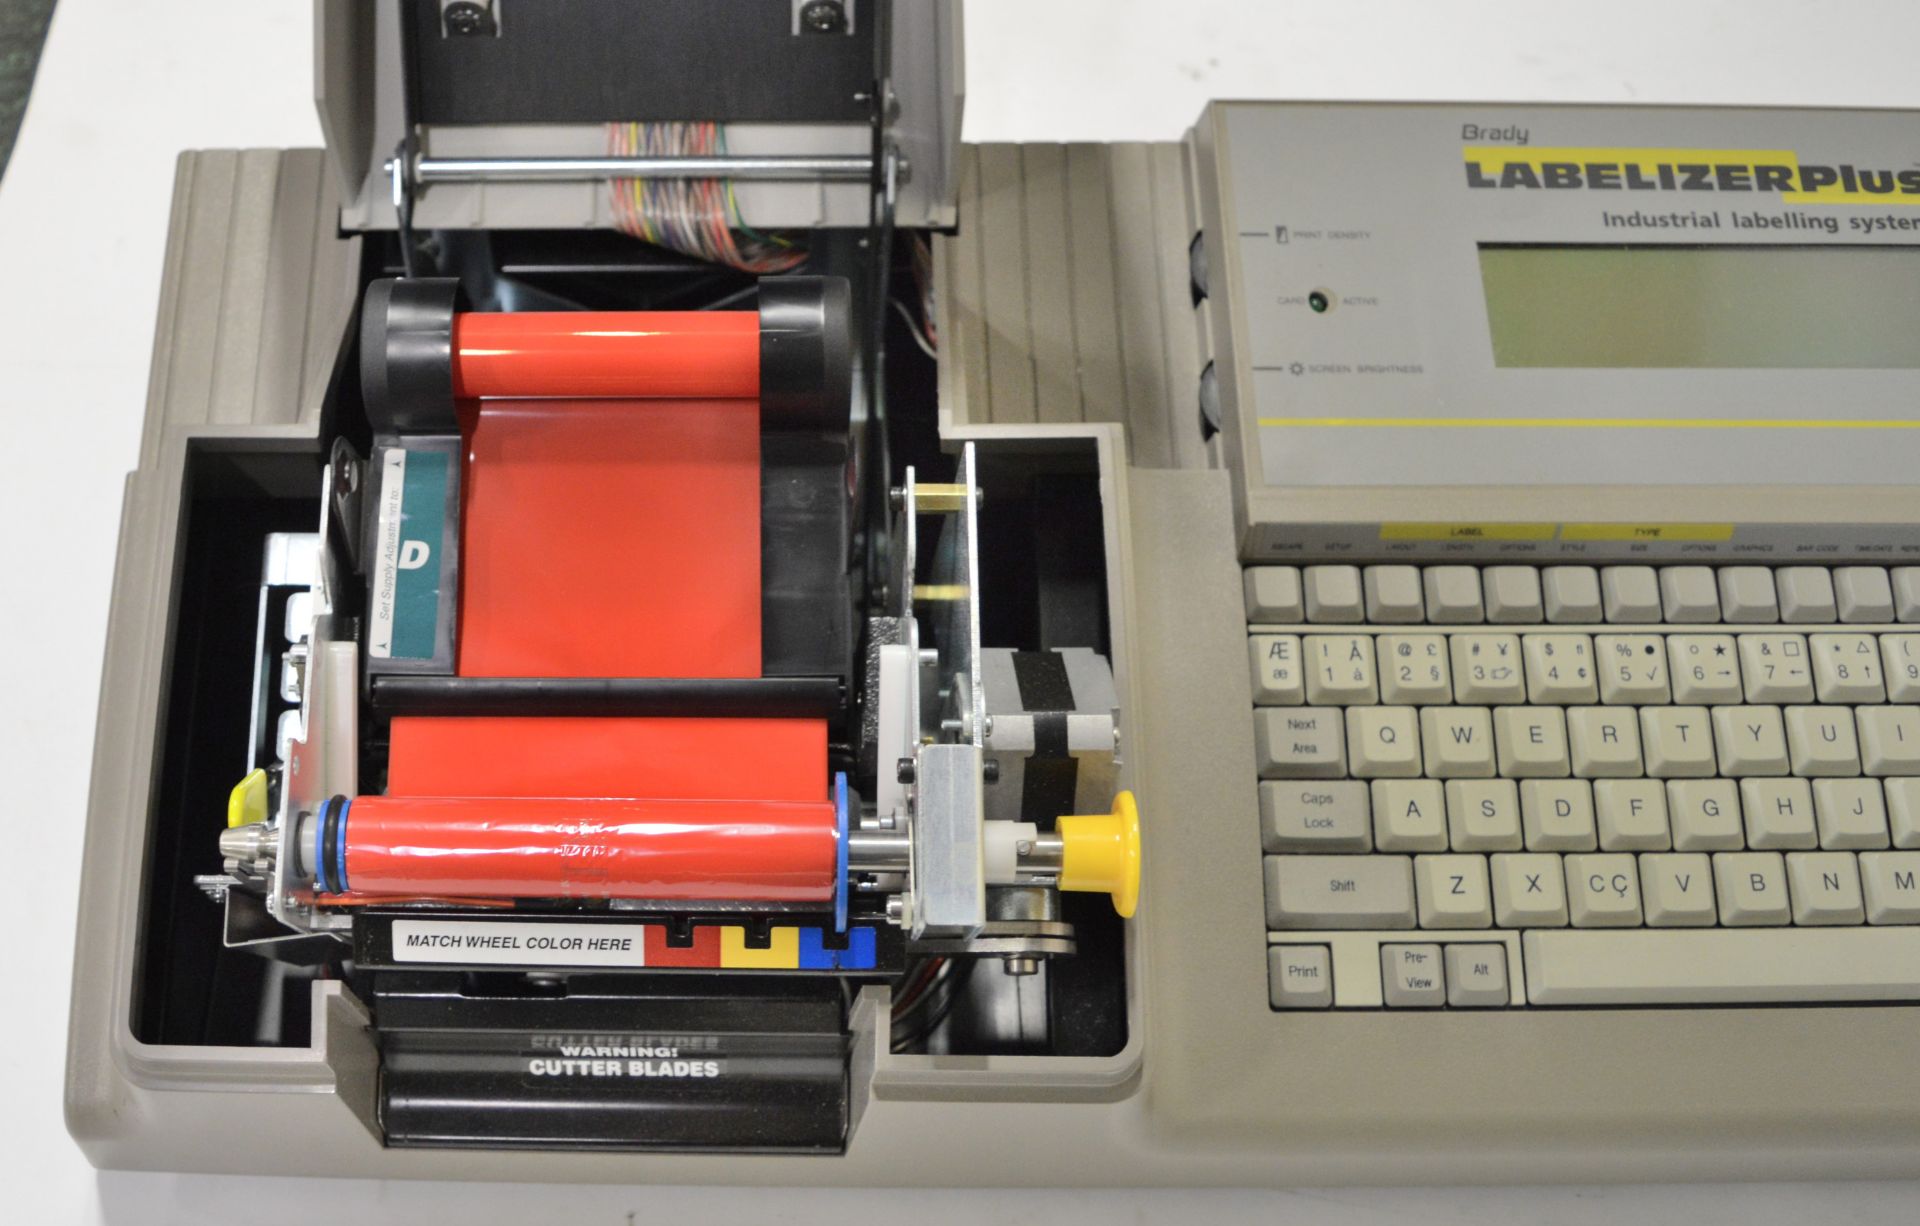 Brady Labelizer Plus Industrial Labelling Machine, 21x Boxes of Cartridges. - Image 3 of 4